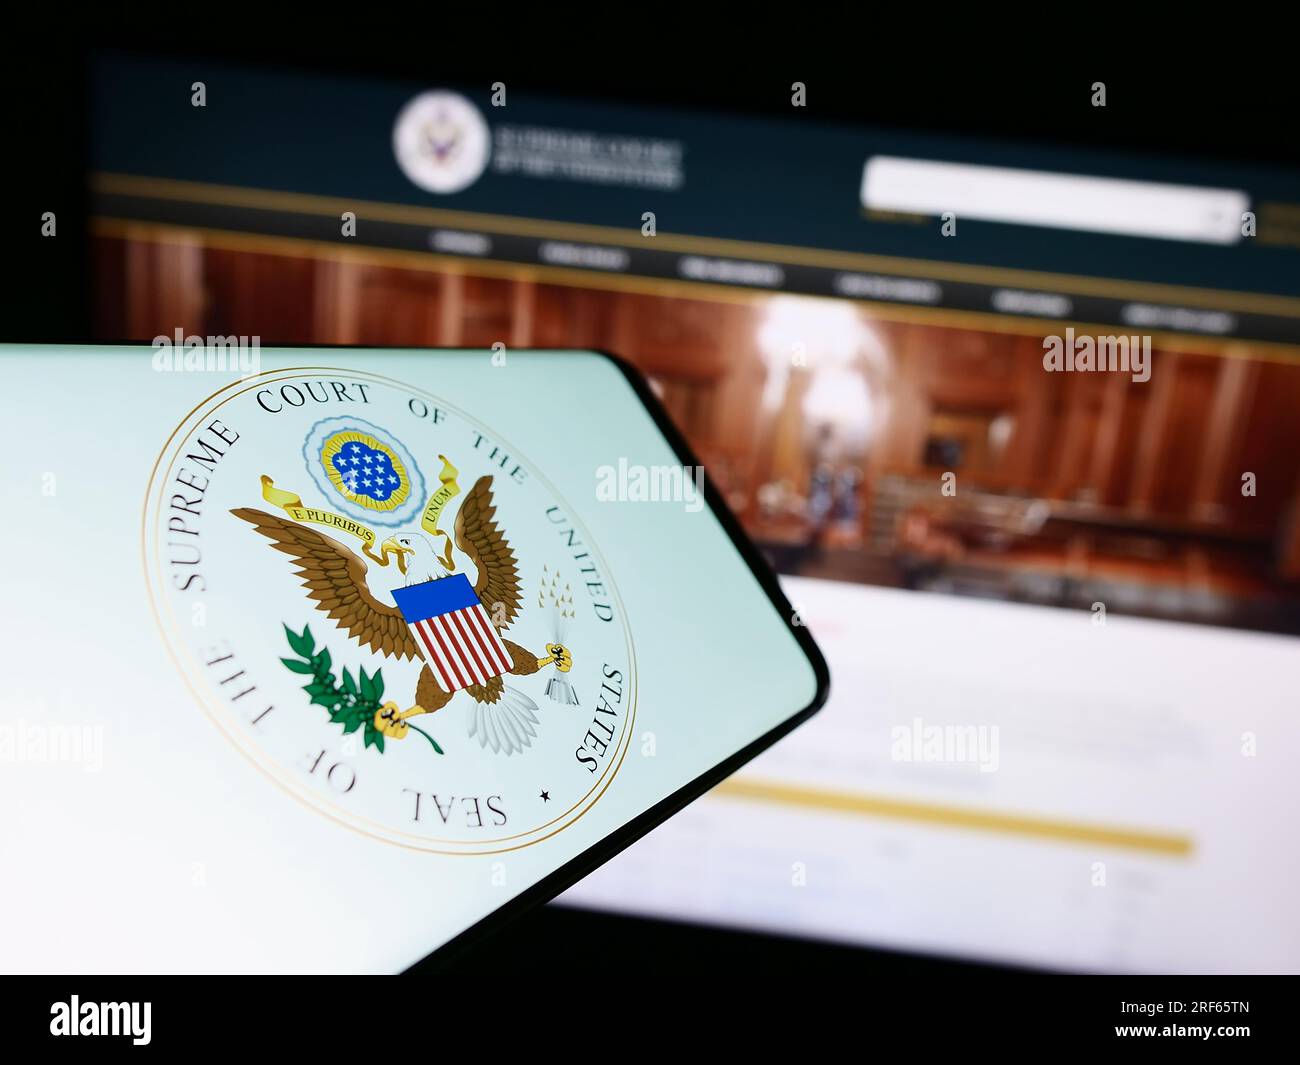 Smartphone with seal of the US Supreme Court (SCOTUS) on screen in front of website. Focus on center of phone display. Stock Photo